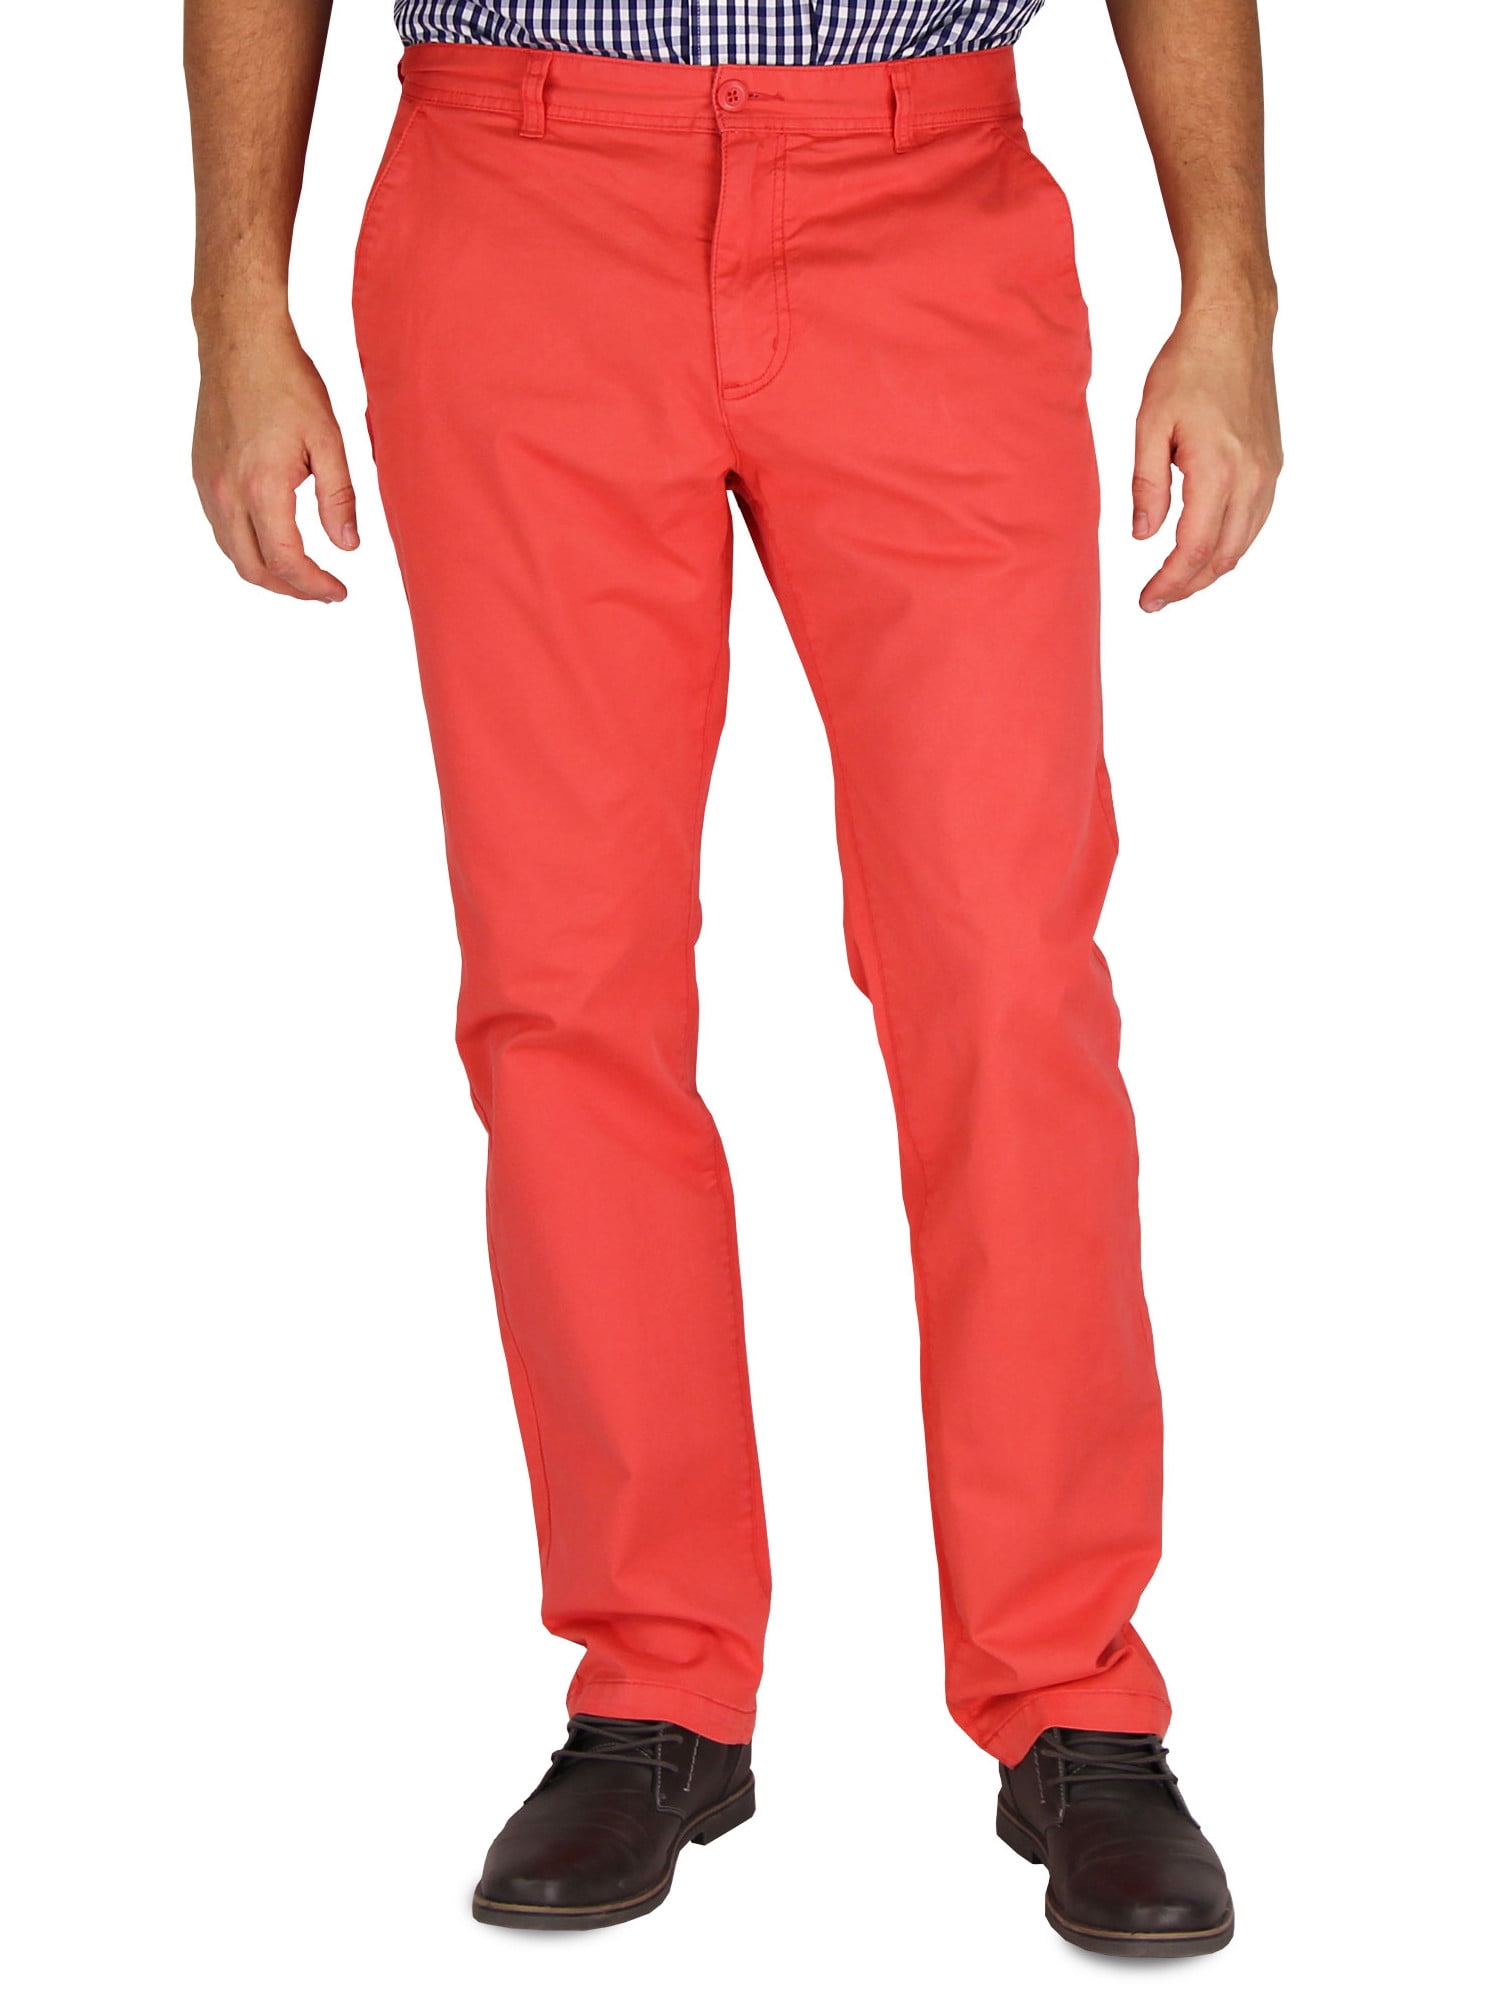 Mens Modern Stretch Fit Flat Front Casual Pants (Sail Red, Size 36W x ...